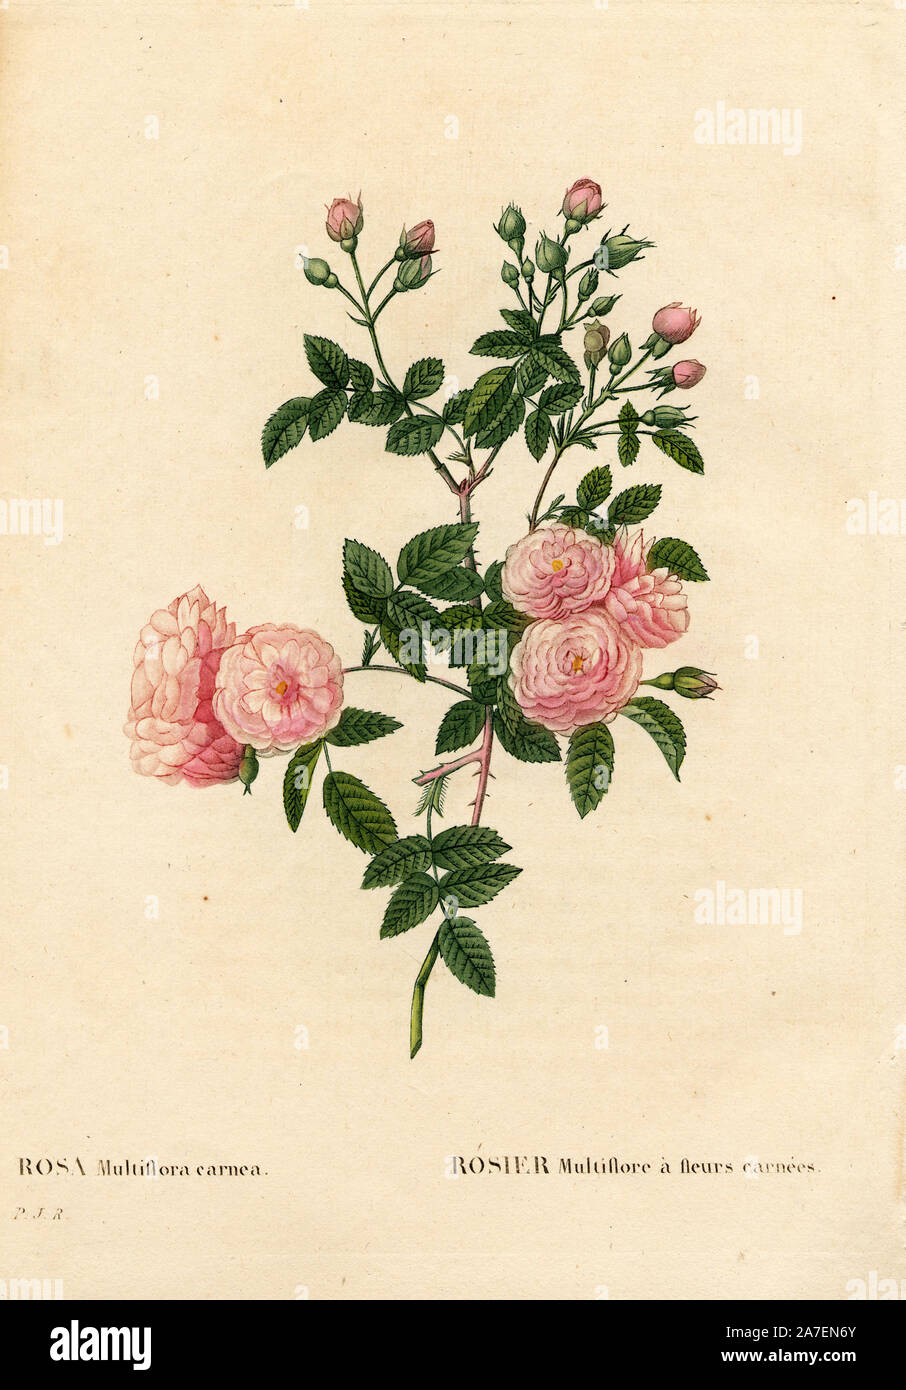 Flesh-pink multiflora rose, Rosa multiflora var. carnea, Rosier Multiflore à fleurs carnées. Handcoloured stipple copperplate engraving from Pierre Joseph Redoute's 'Les Roses,' Paris, 1828. Redoute was botanical artist to Marie Antoinette and Empress Josephine. He painted over 170 watercolours of roses from the gardens of Malmaison. Stock Photo